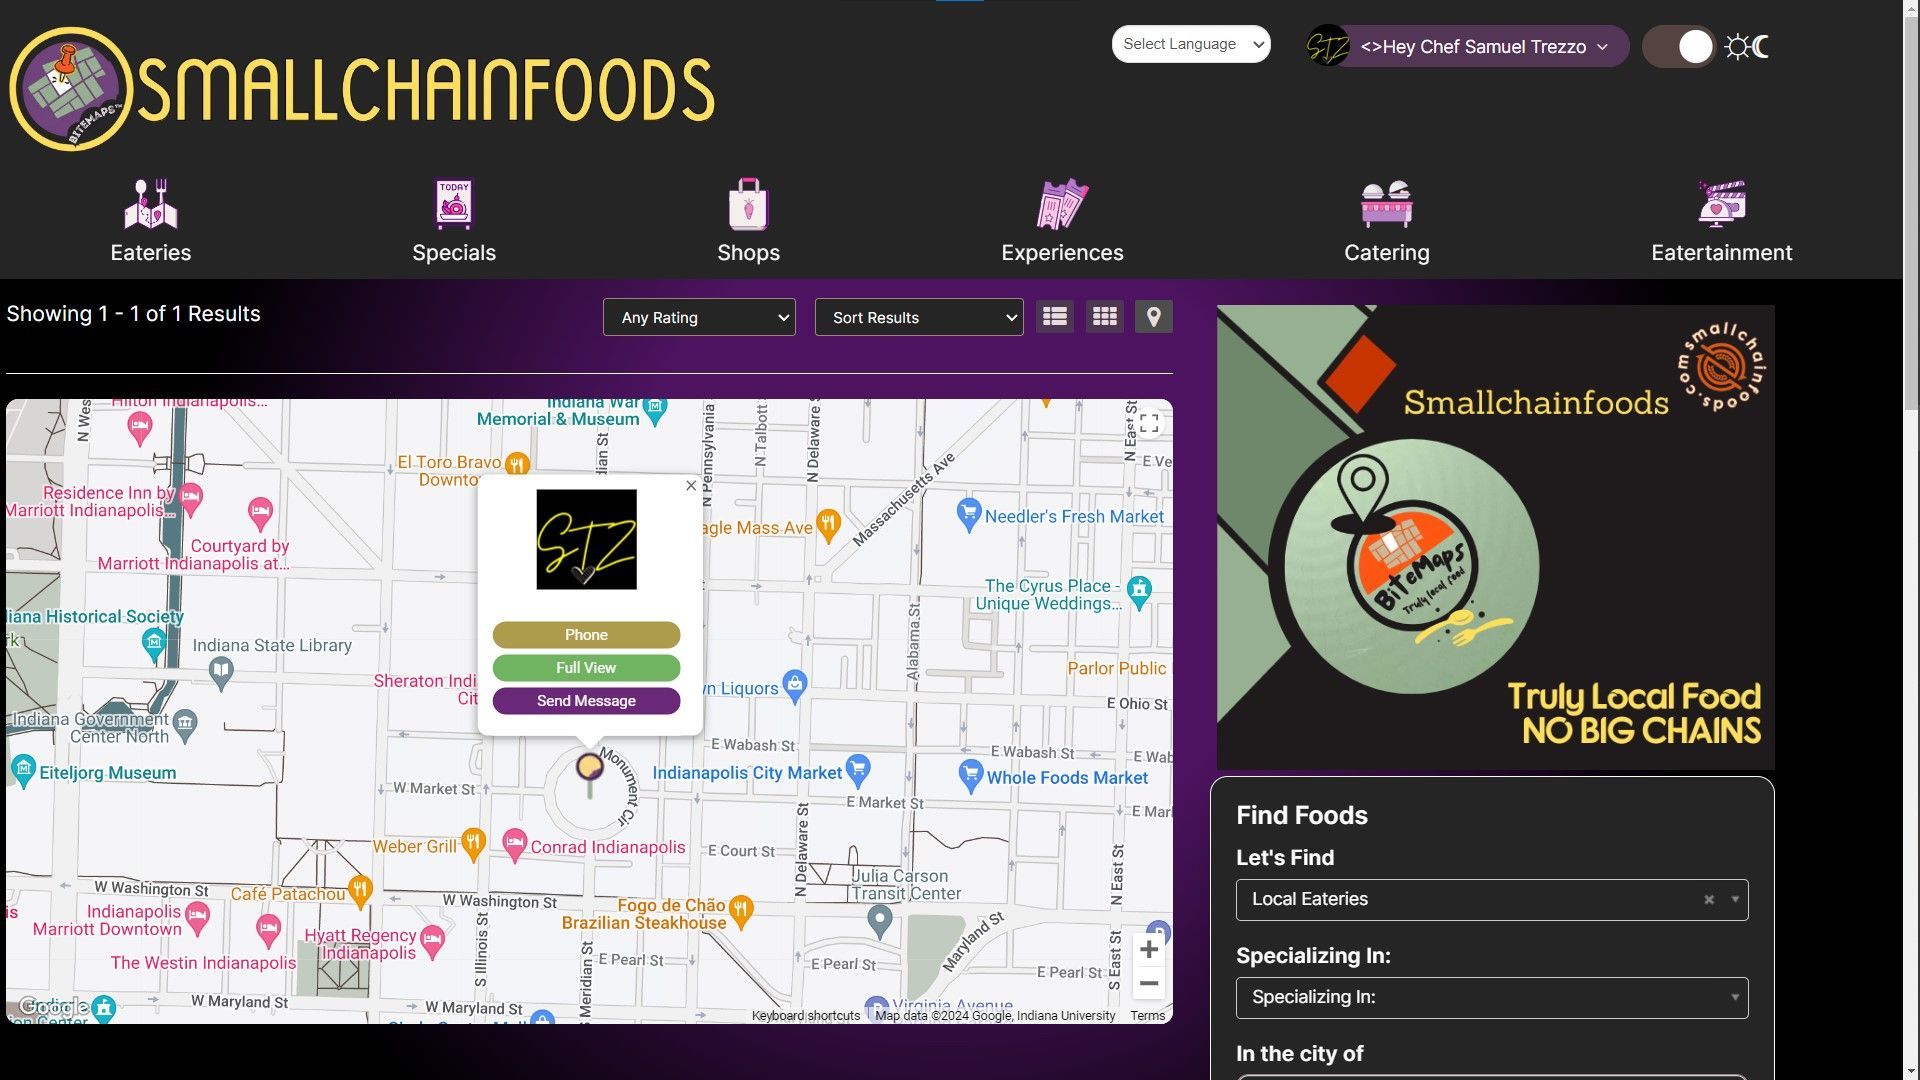 A smallchainfoods website shows a map of a city